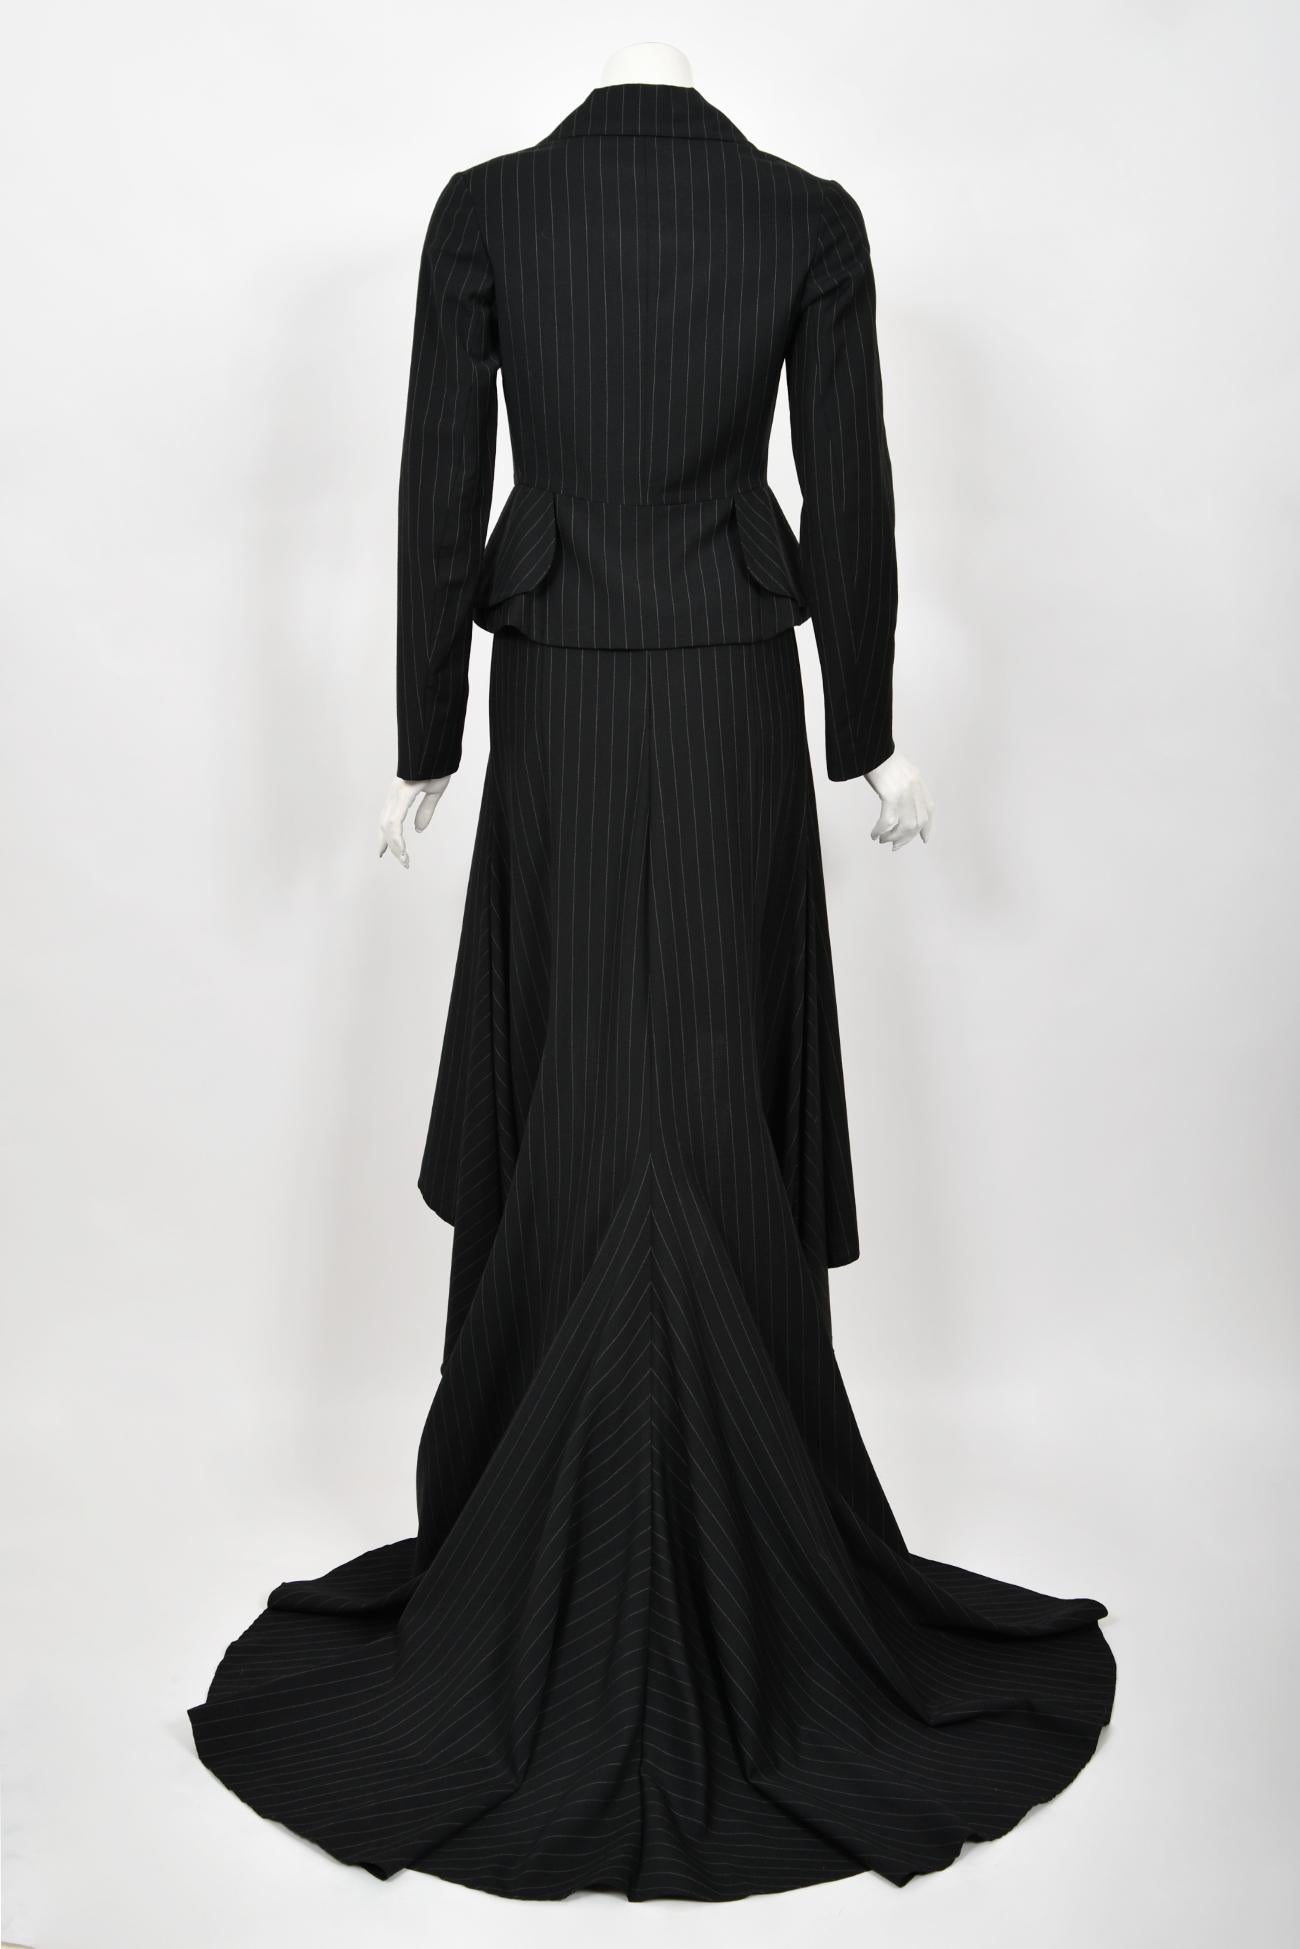 Archival 1994 Vivienne Westwood Pinstripe Wool Jacket and High-Low Trained Skirt For Sale 13